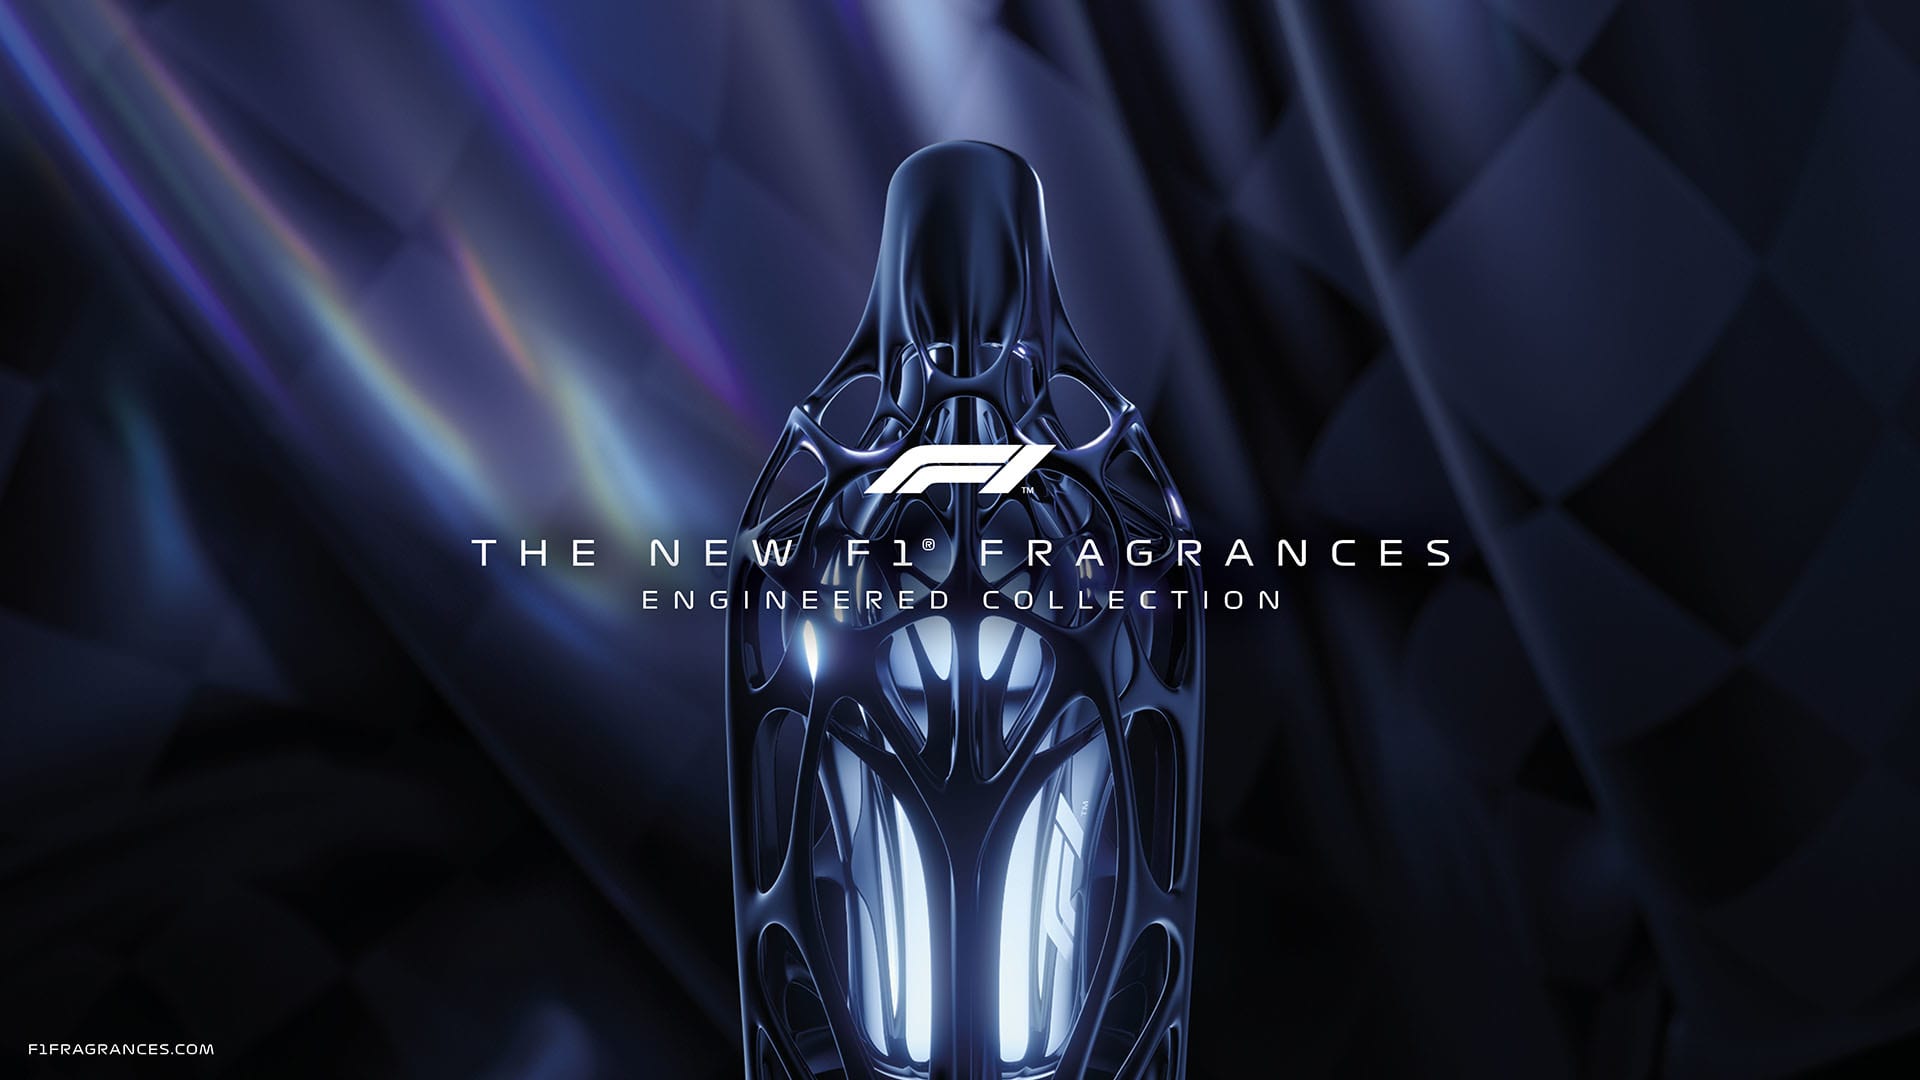 F1 Fragrances Engineered Collection world | first features 1® Formula